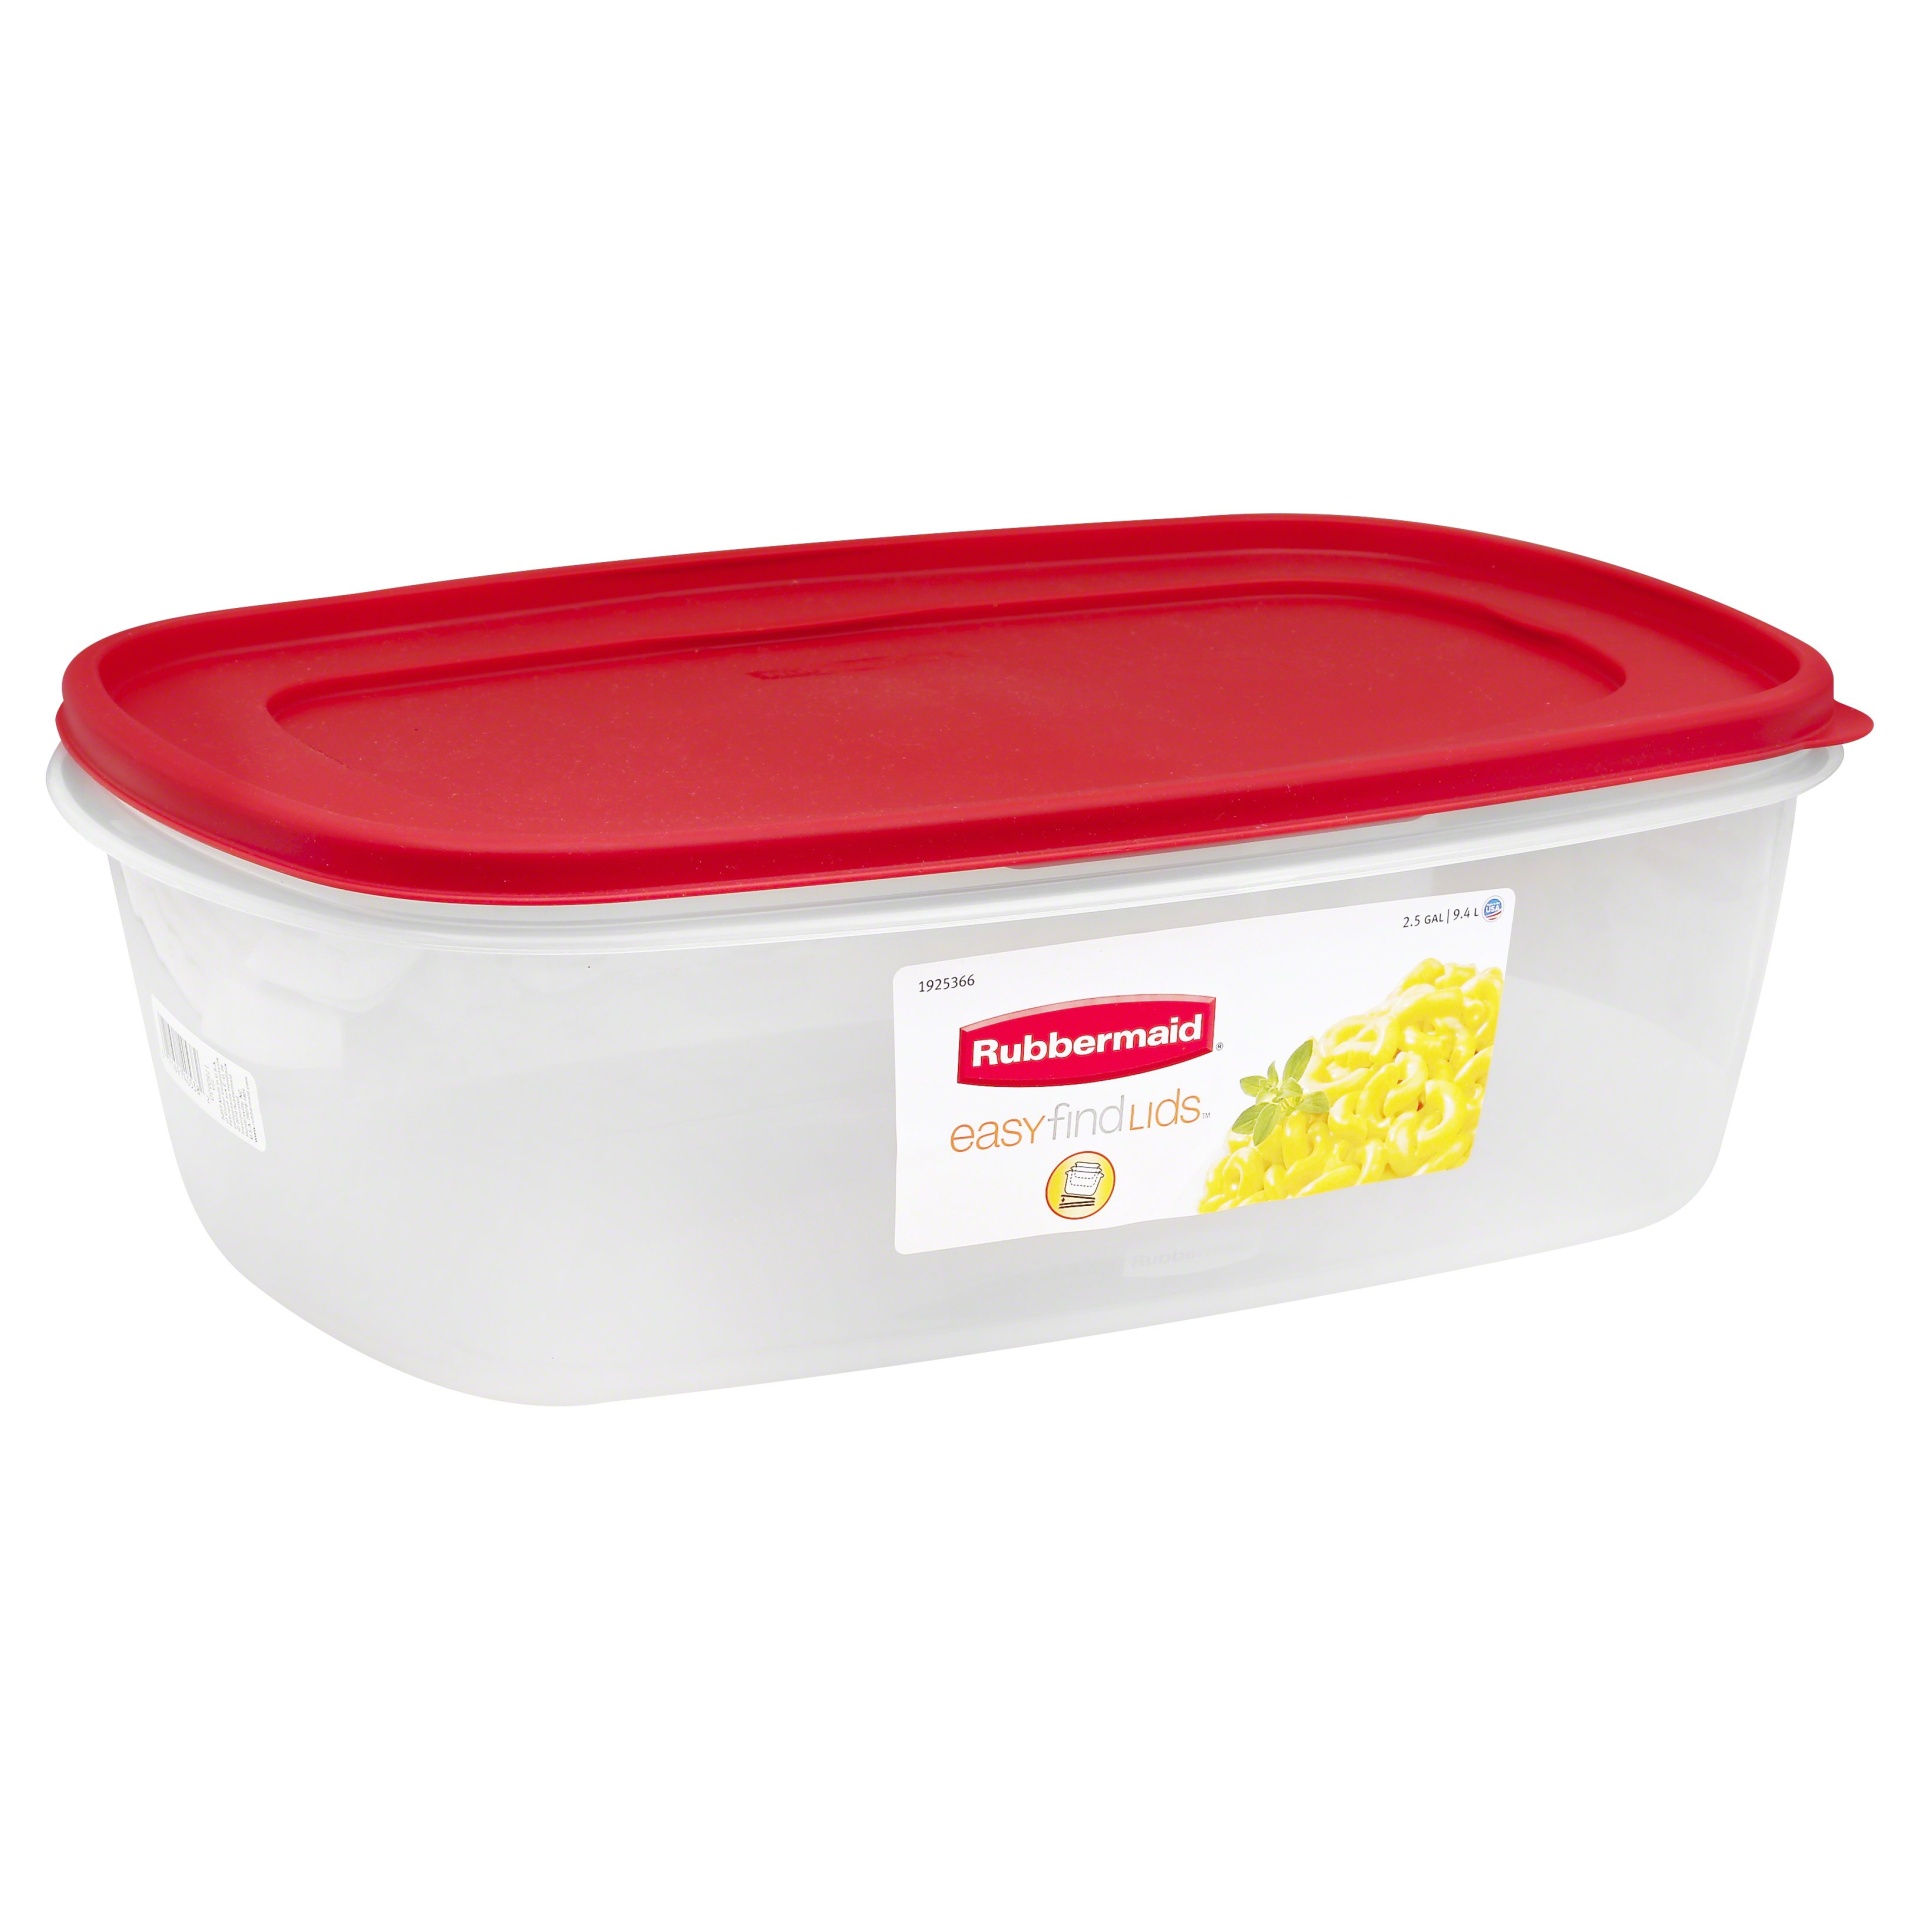 slide 1 of 5, Rubbermaid Easy Find Lids Rectangle Food Storage Container, 2.5 gal